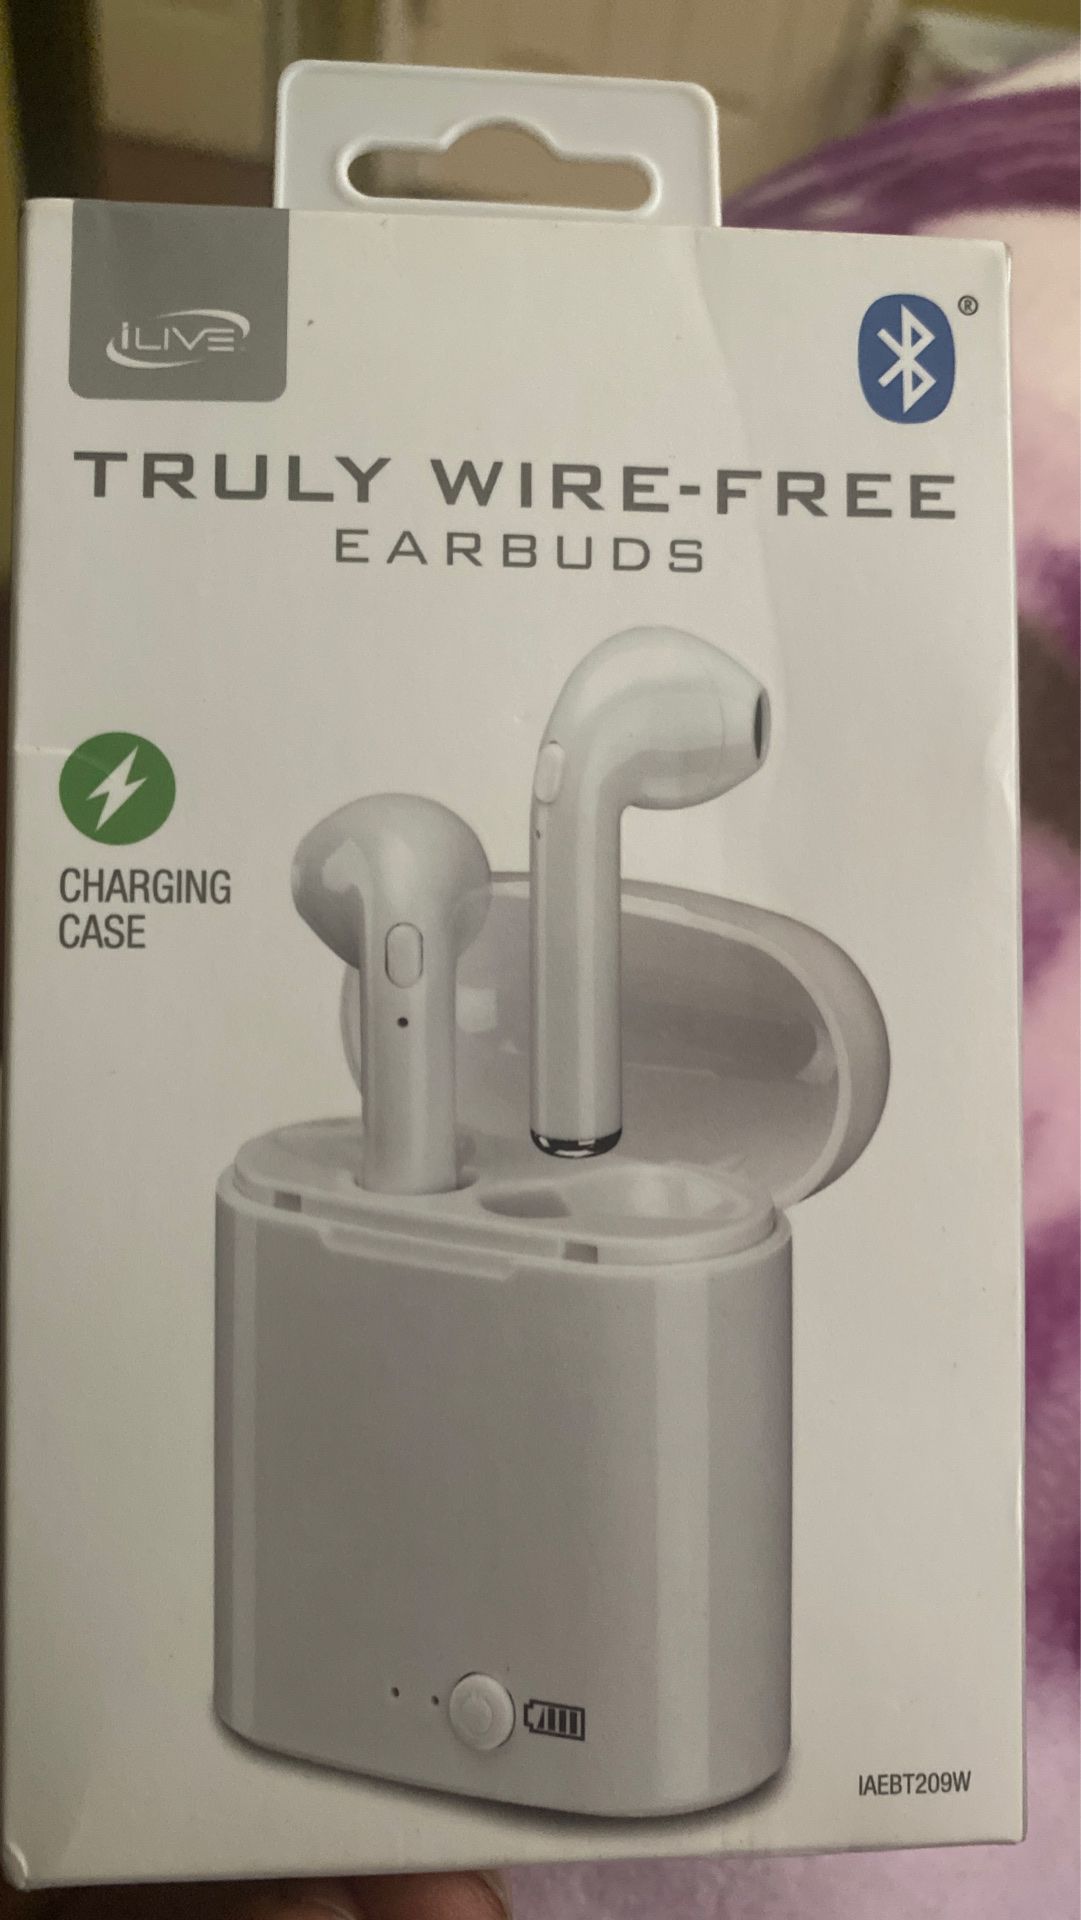 Truly Wire-free Earbuds CHARGING CASE🔋